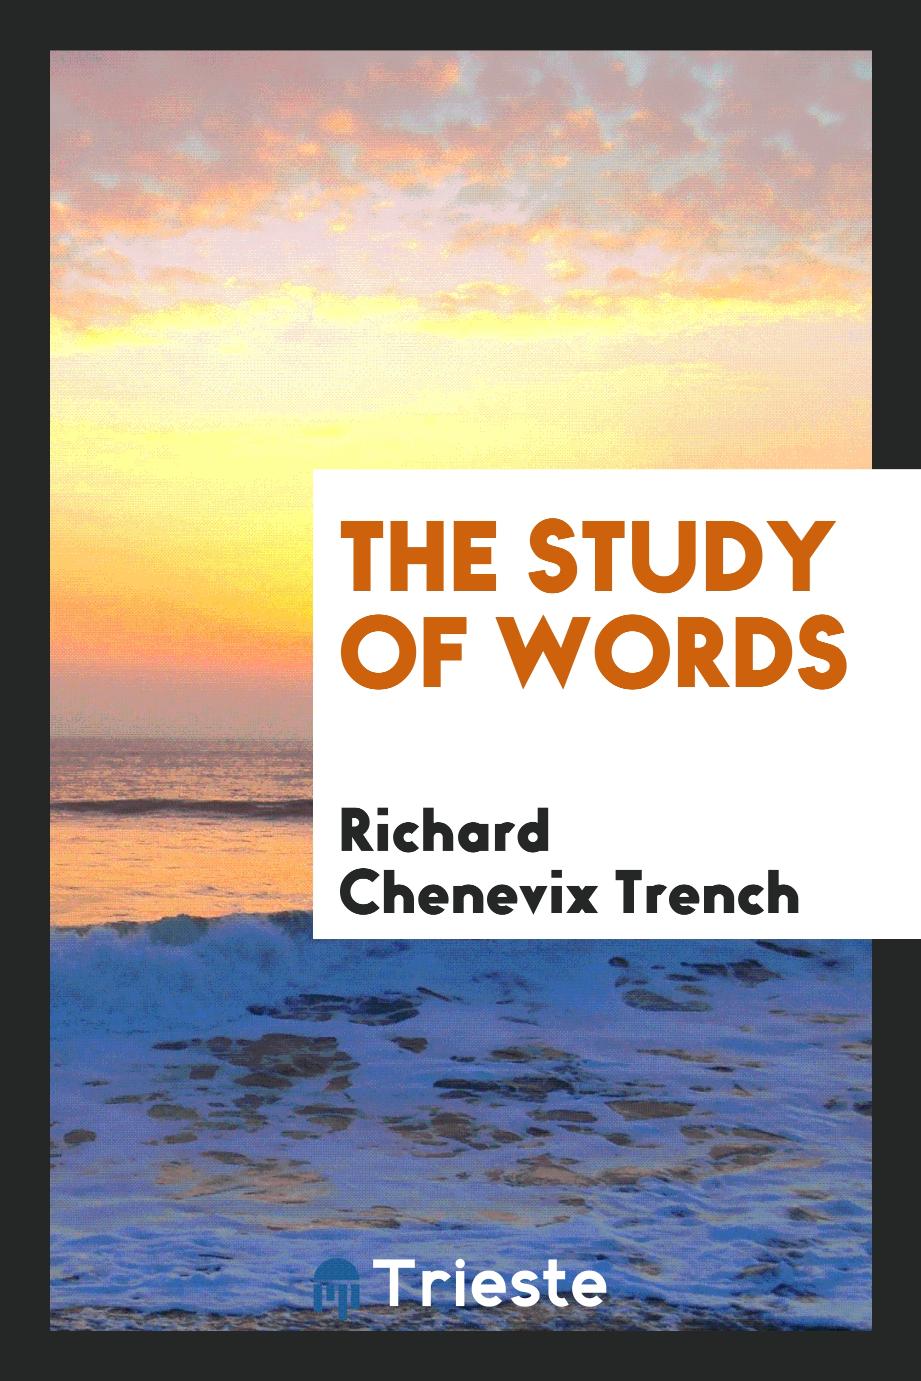 The Study of Words